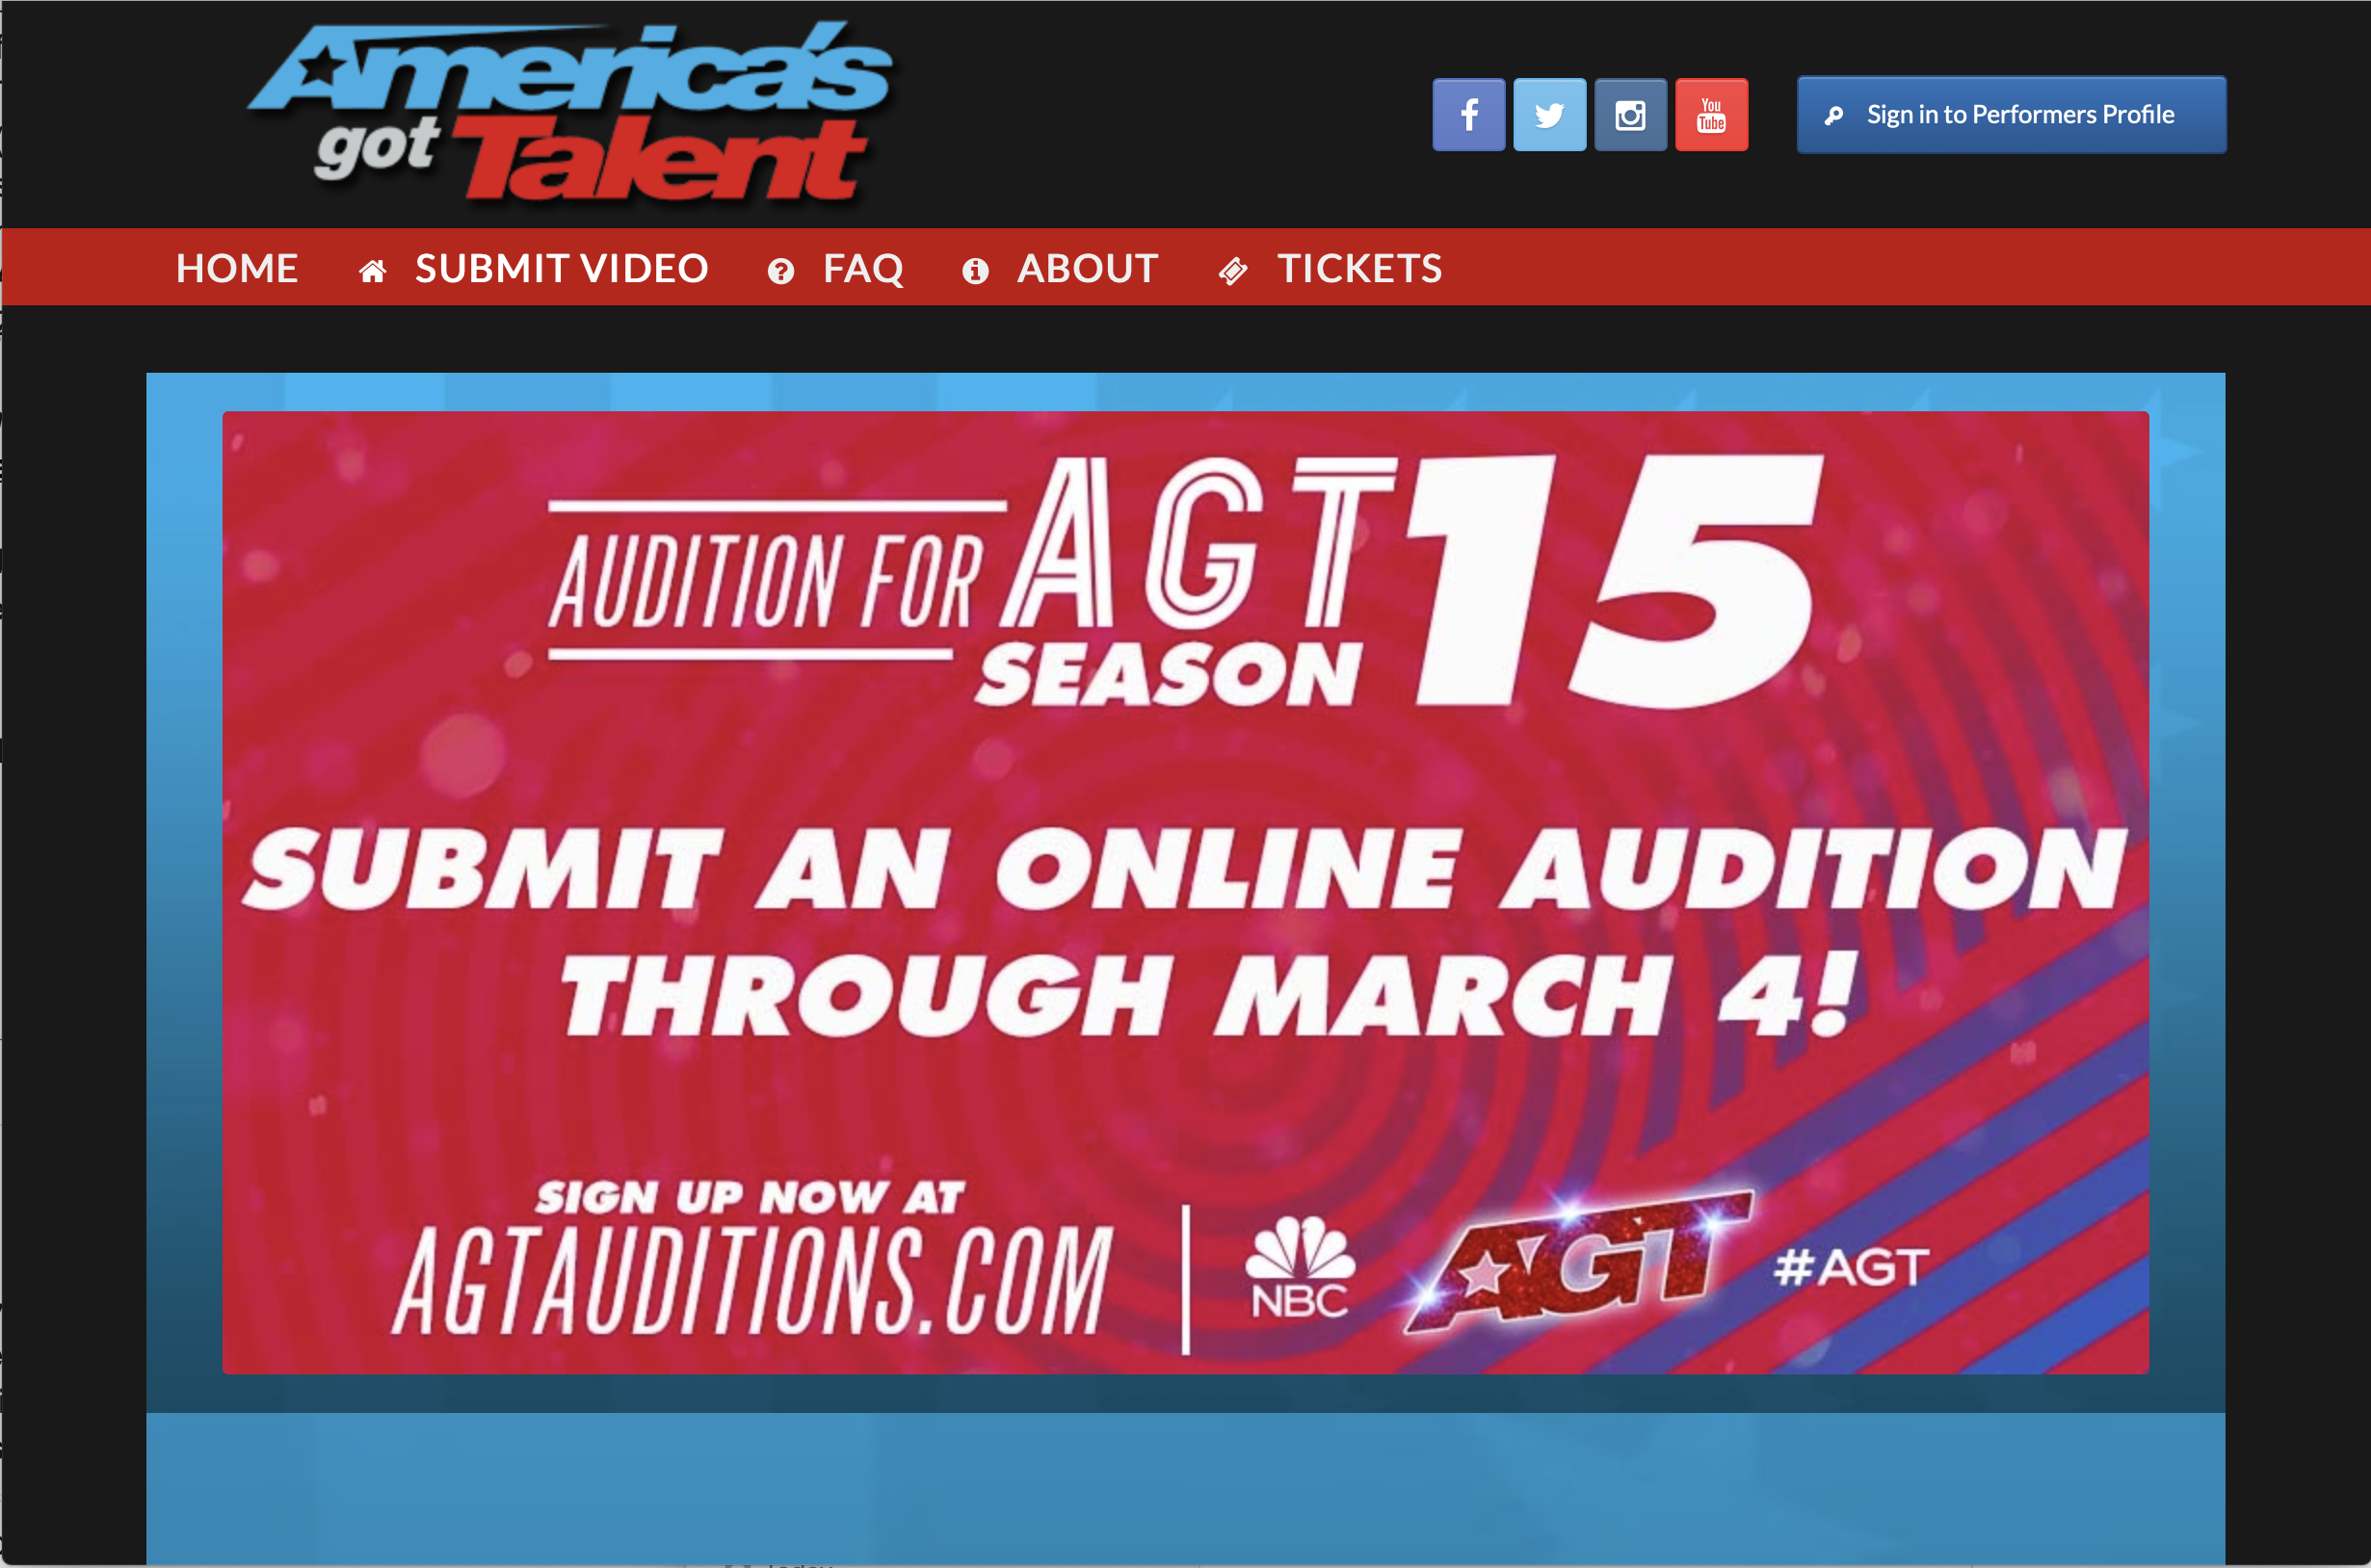 Have you ever wanted to audition for America's Got Talent? Find out how !